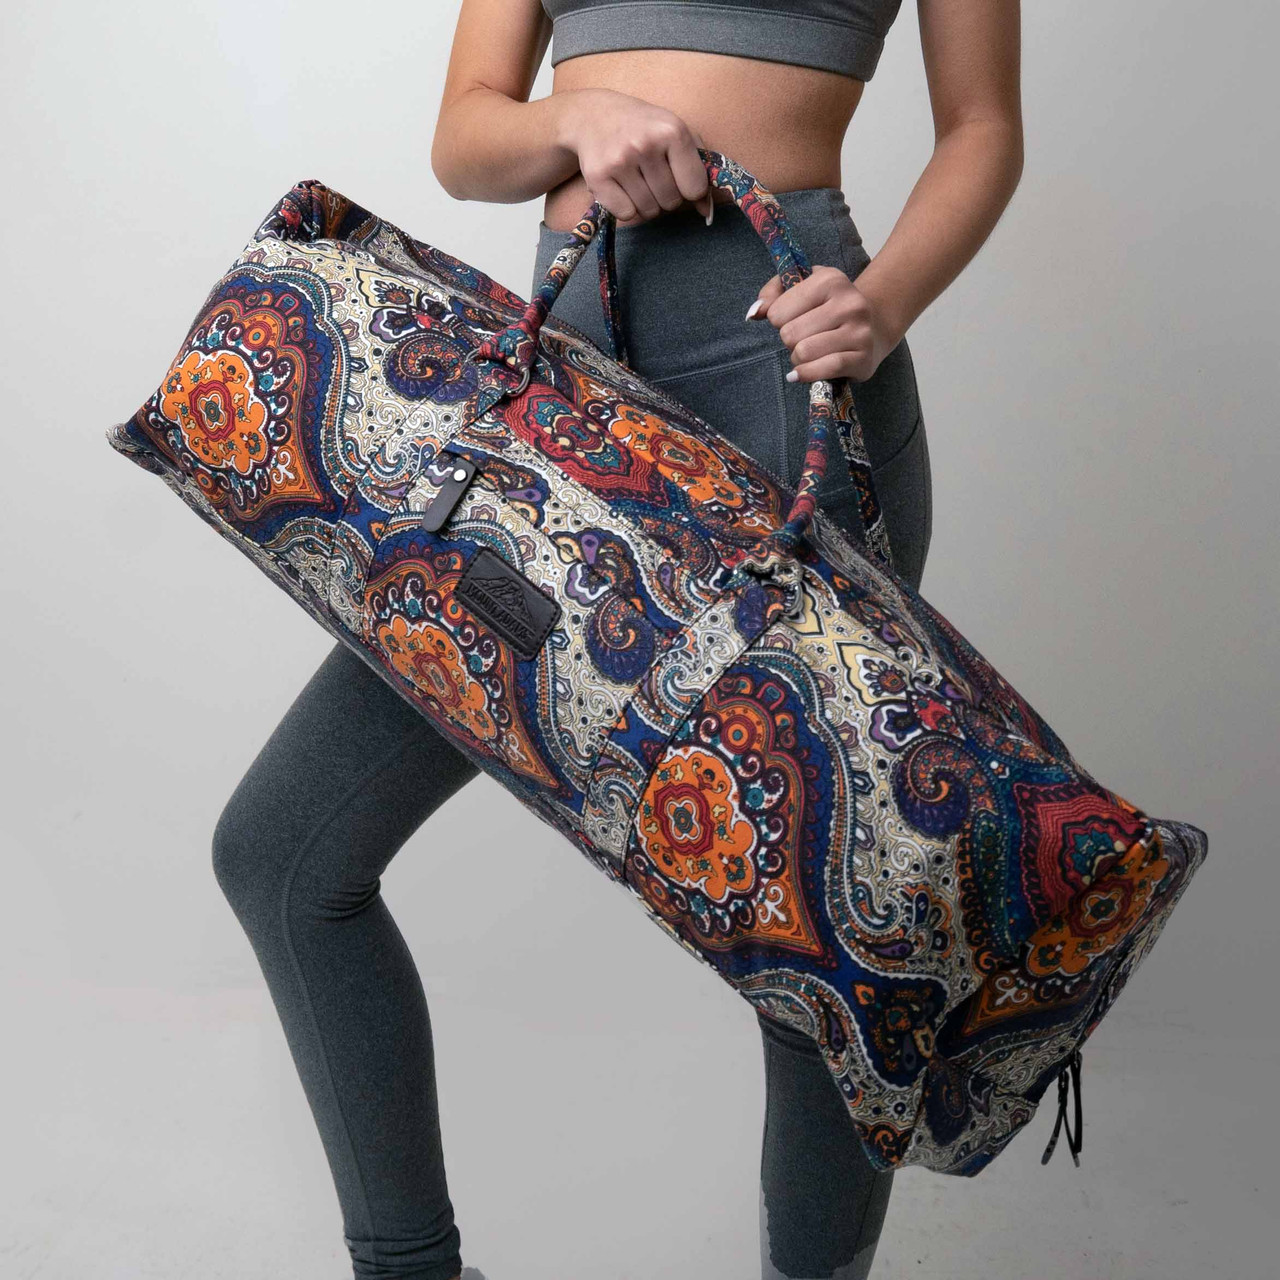 KUAK Yoga Mat Bag Large Yoga Bags and Carriers, L30 xW9 xH11, with